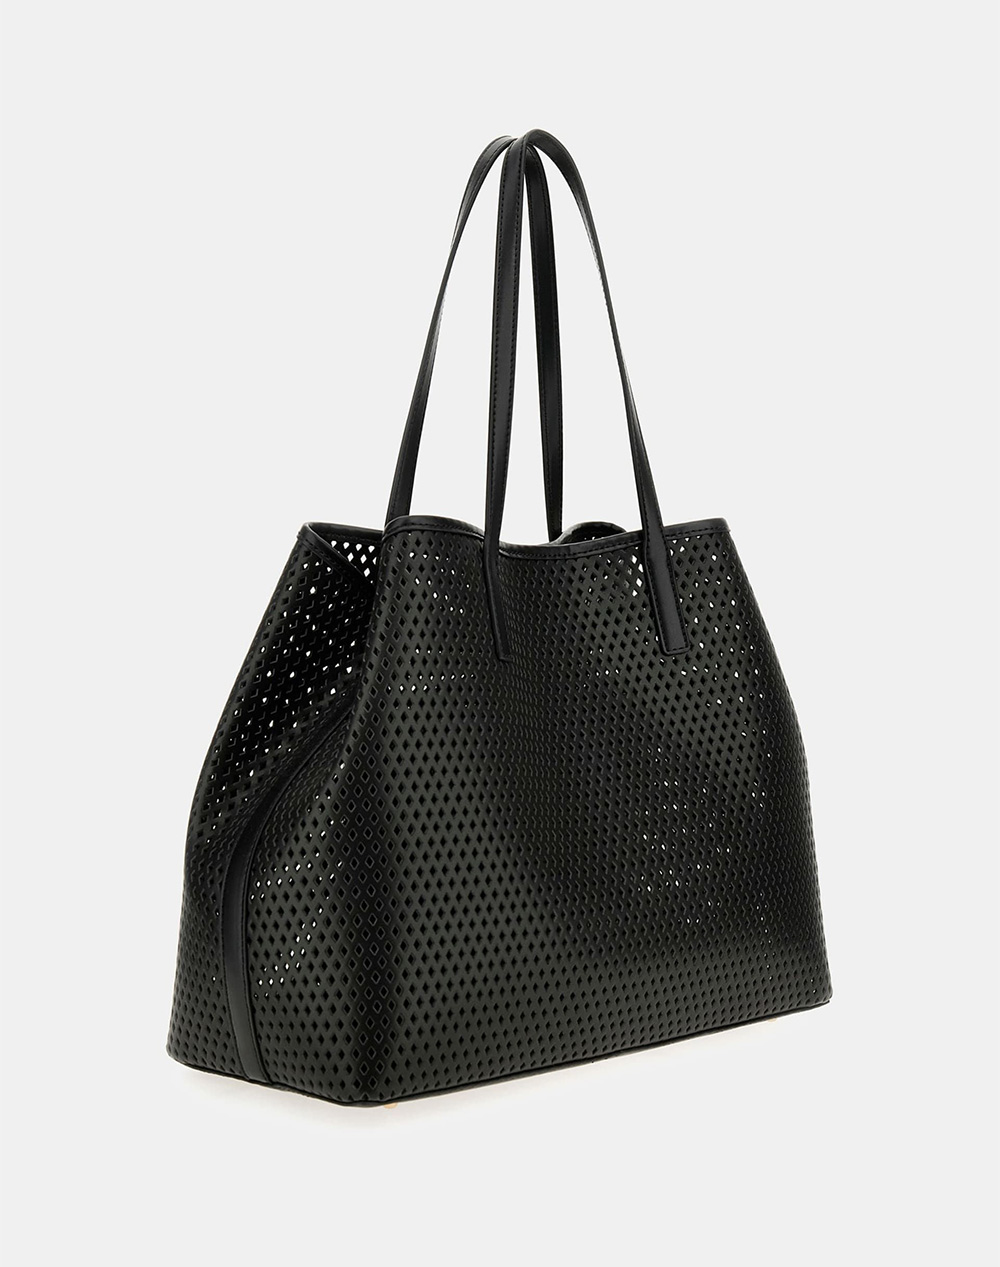 Guess Vikky Tote in Black